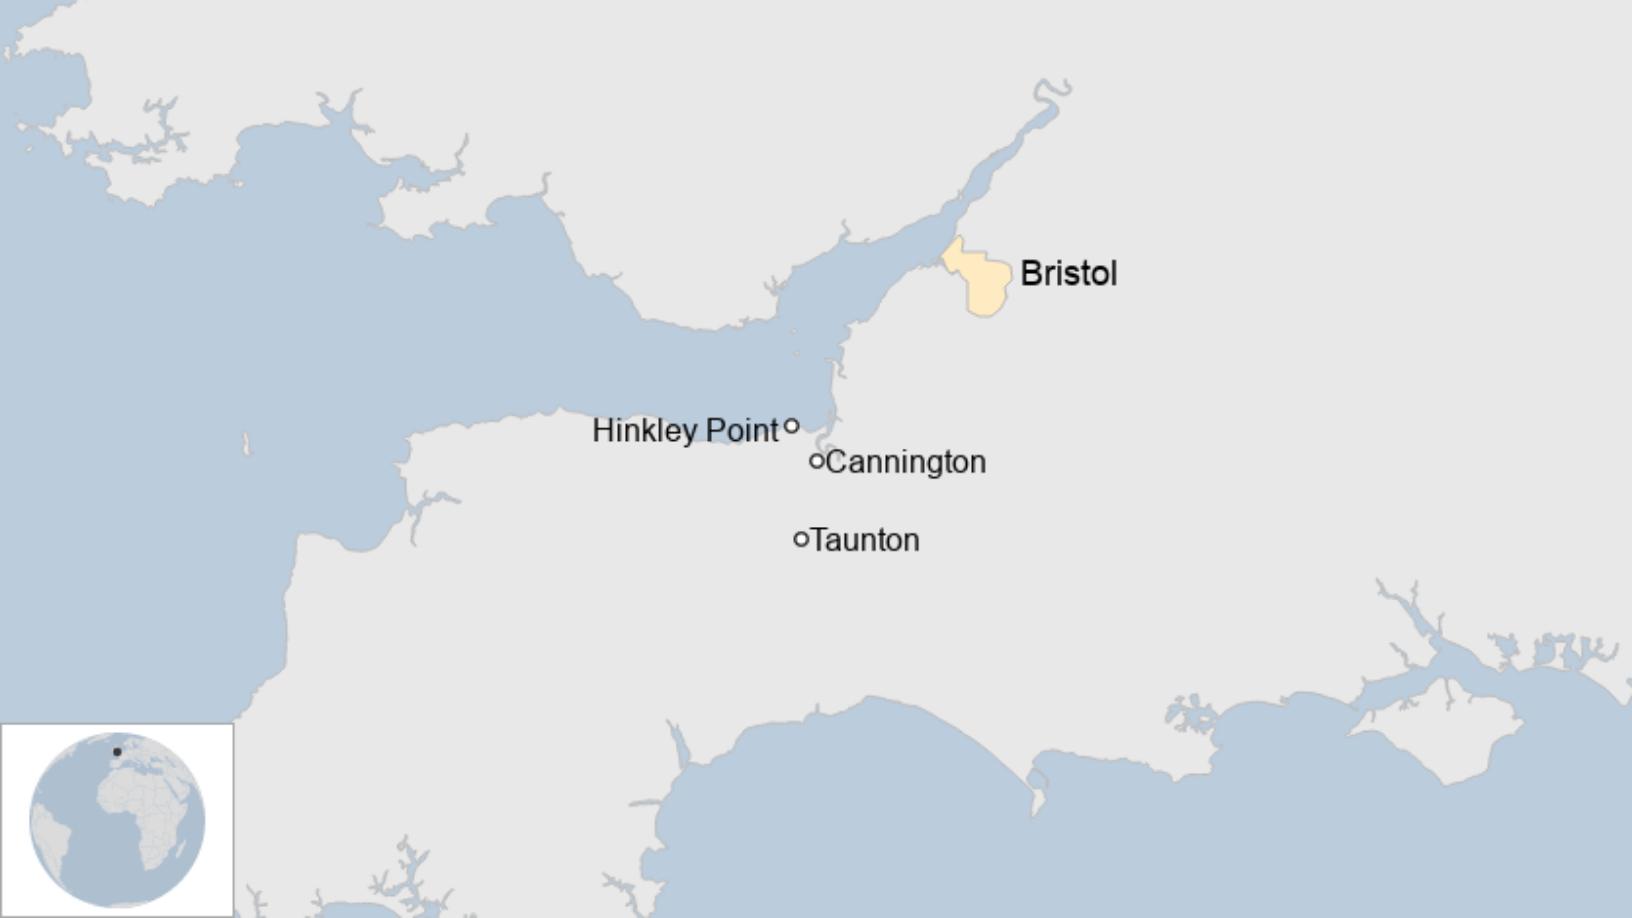 Map: South West England - and the location of a bus crash